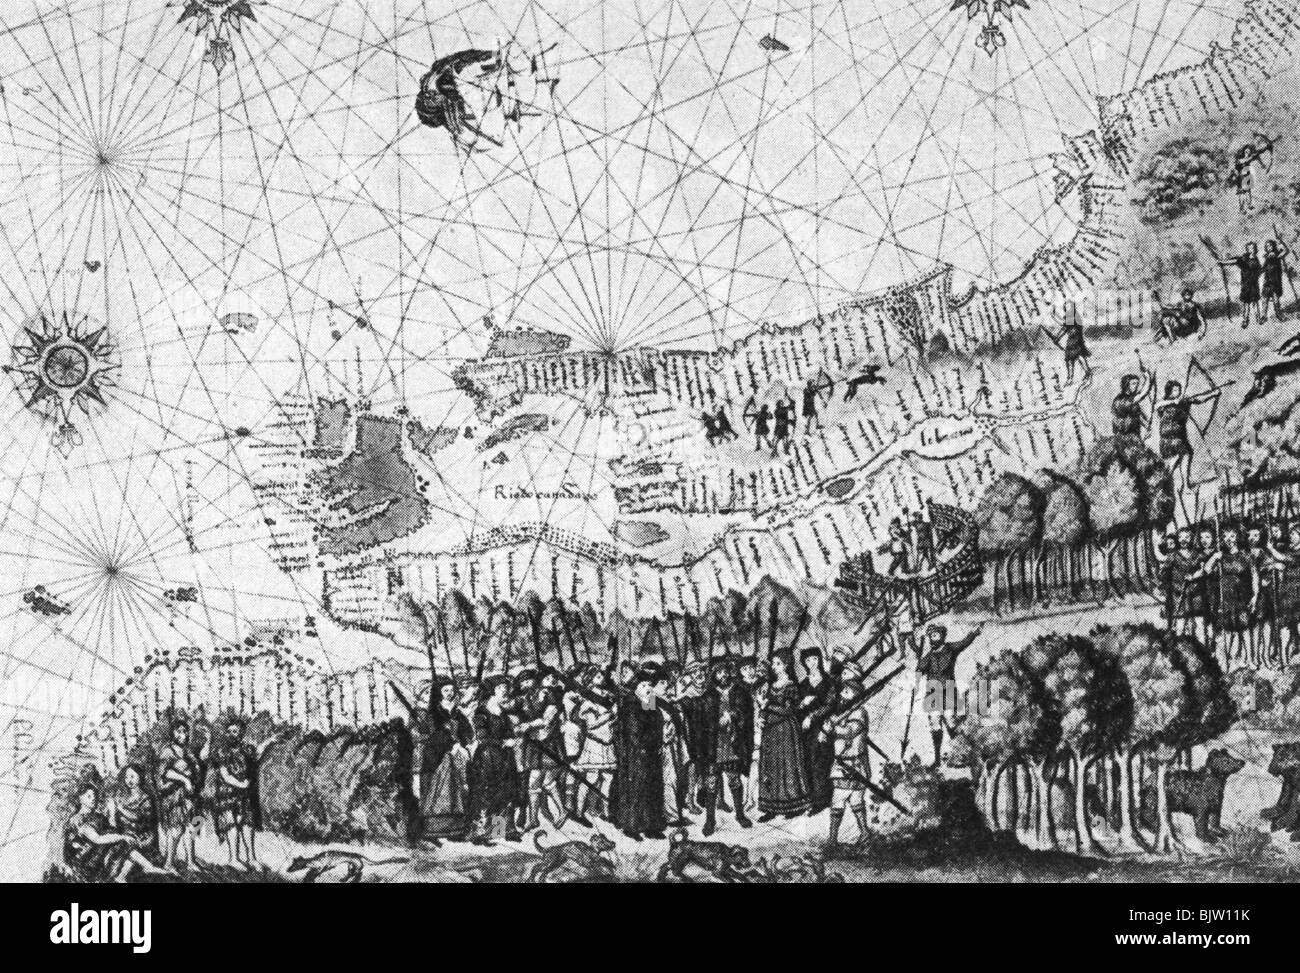 Cartier, Jacques, 1491 - 1.9.1557, French explorer, landing with colonists in Canada, 1542, drawing on map by Vallard 1546, Hundington Library, San Marino, Stock Photo